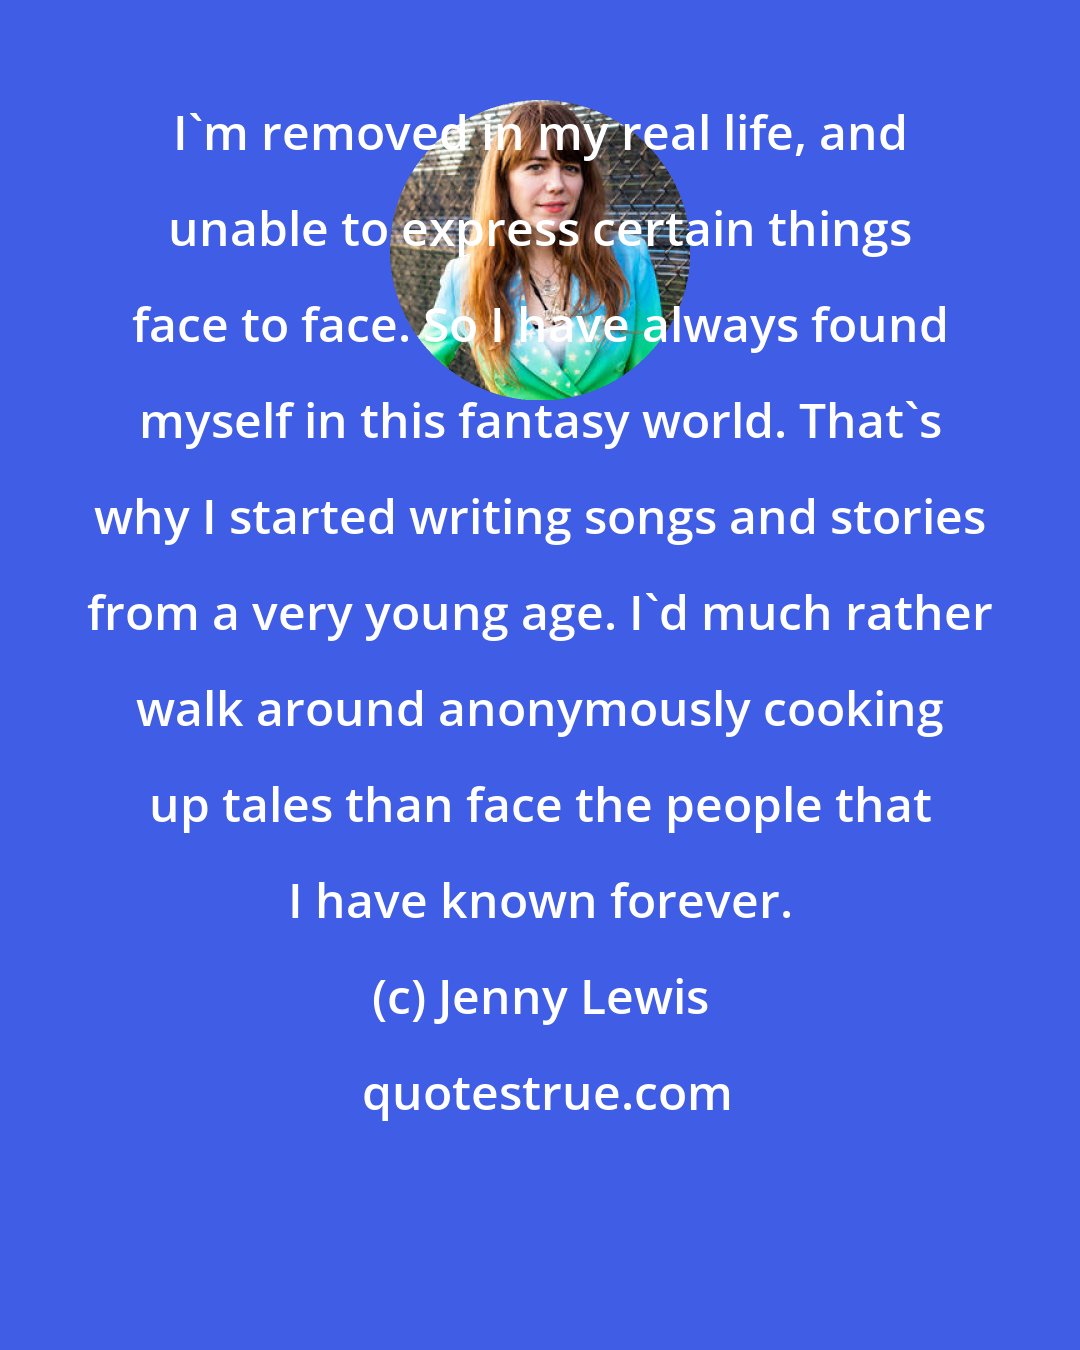 Jenny Lewis: I'm removed in my real life, and unable to express certain things face to face. So I have always found myself in this fantasy world. That's why I started writing songs and stories from a very young age. I'd much rather walk around anonymously cooking up tales than face the people that I have known forever.